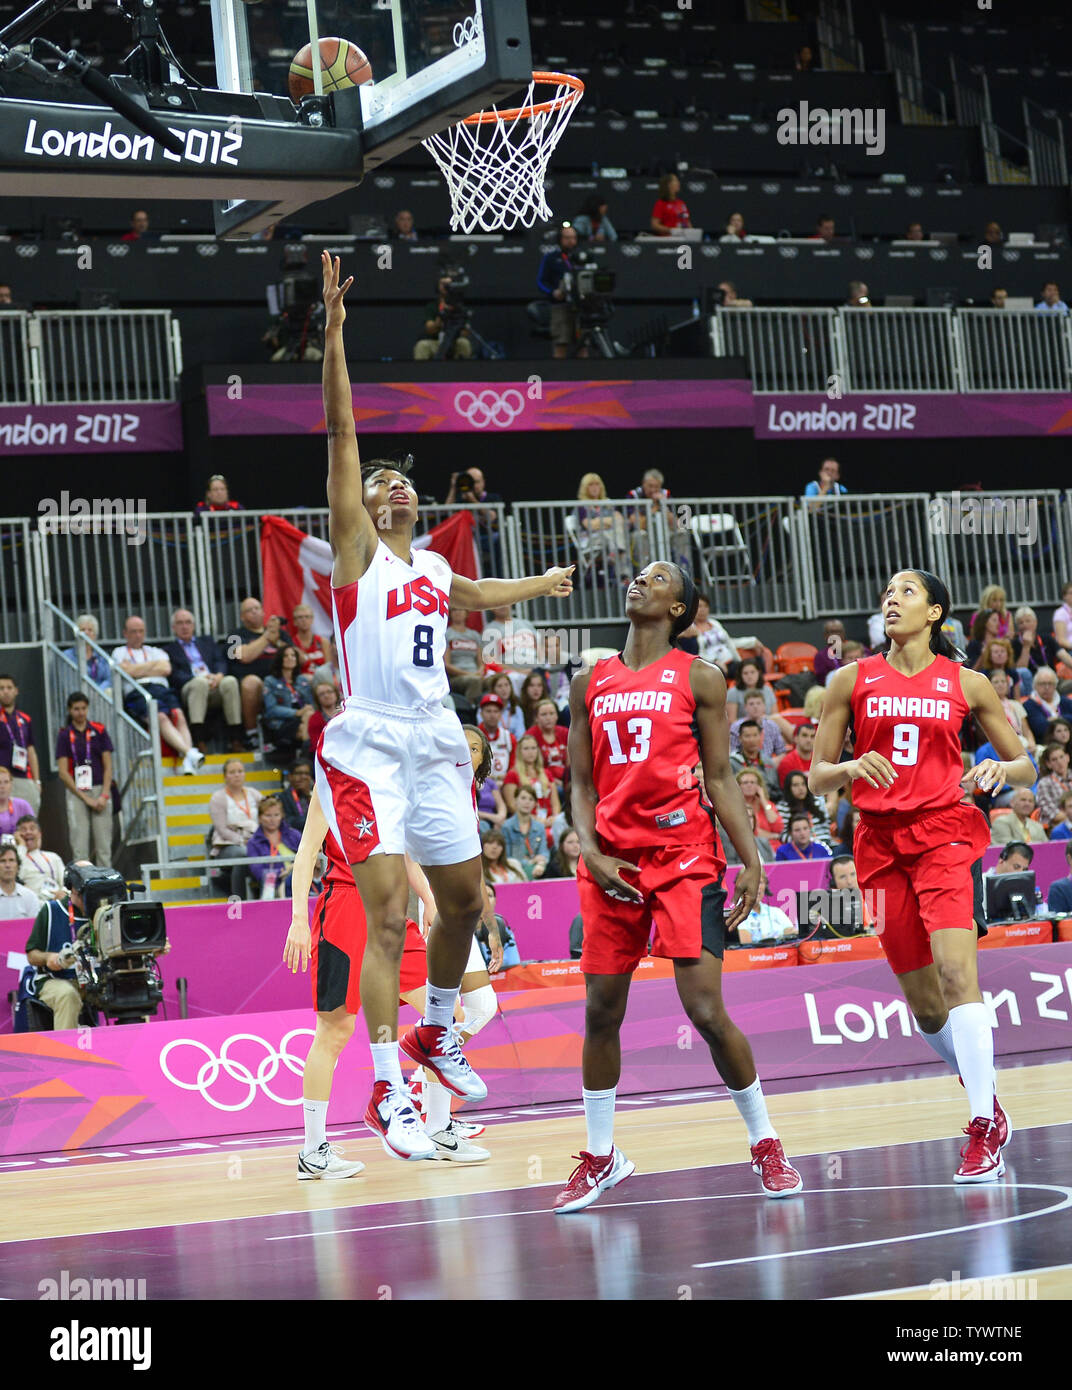 Forward / guard Angel McCoughtry (8) of the United States of America scores in the second half against Canada in the Women's Basketball quarterfinal at the London 2012 Summer Olympics on August 7, 2012 in London. The USA won the game 91 - 48.  UPI/Ron Sachs Stock Photo